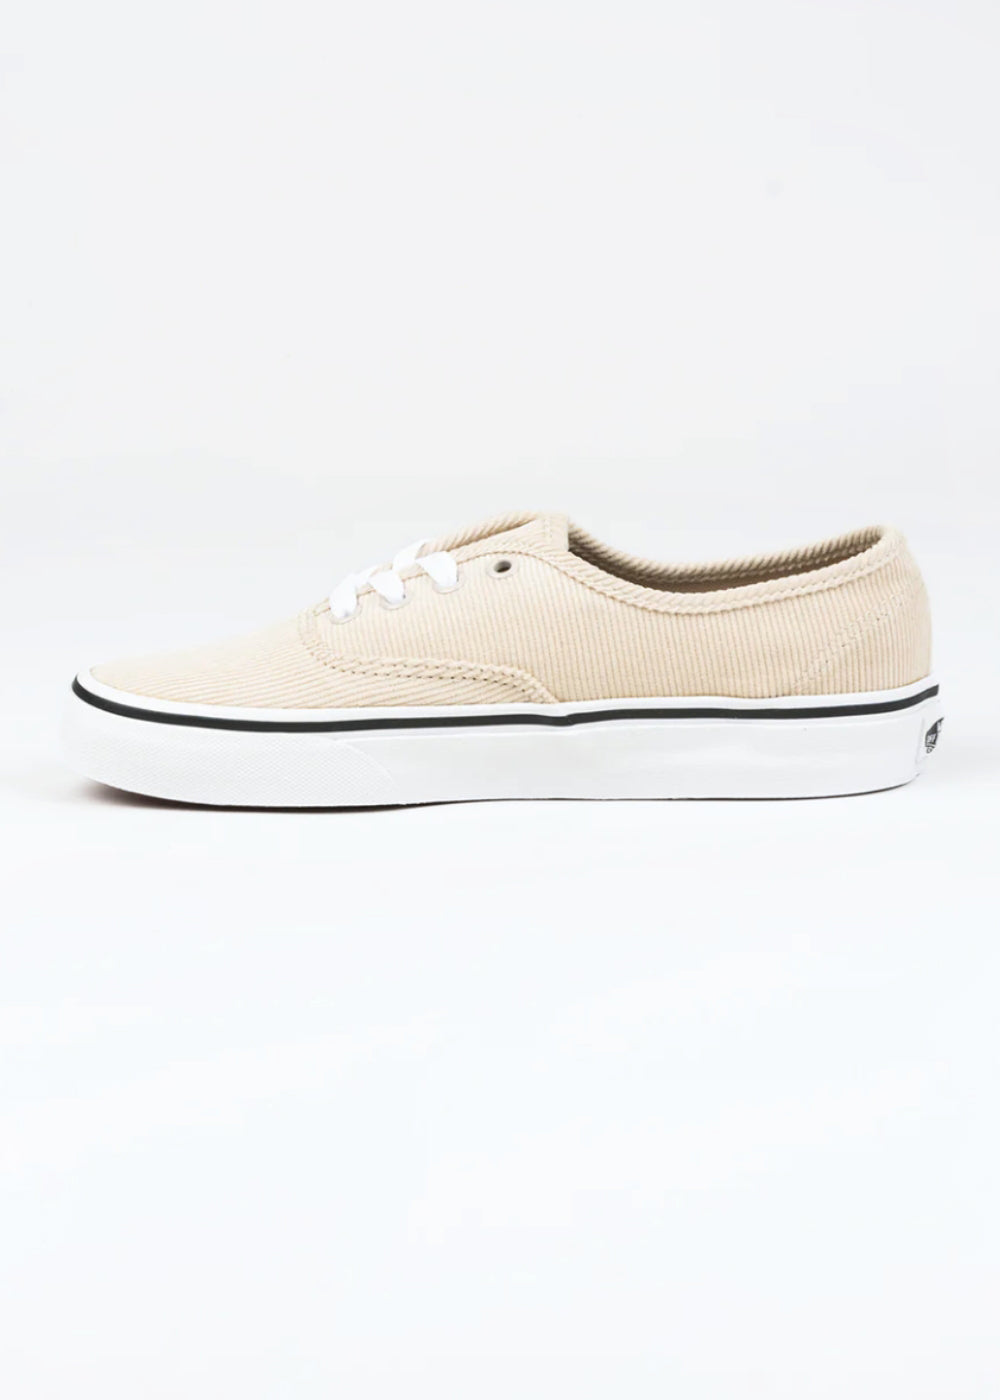 Vans Authentic Shoes in Mini Cord French Oak